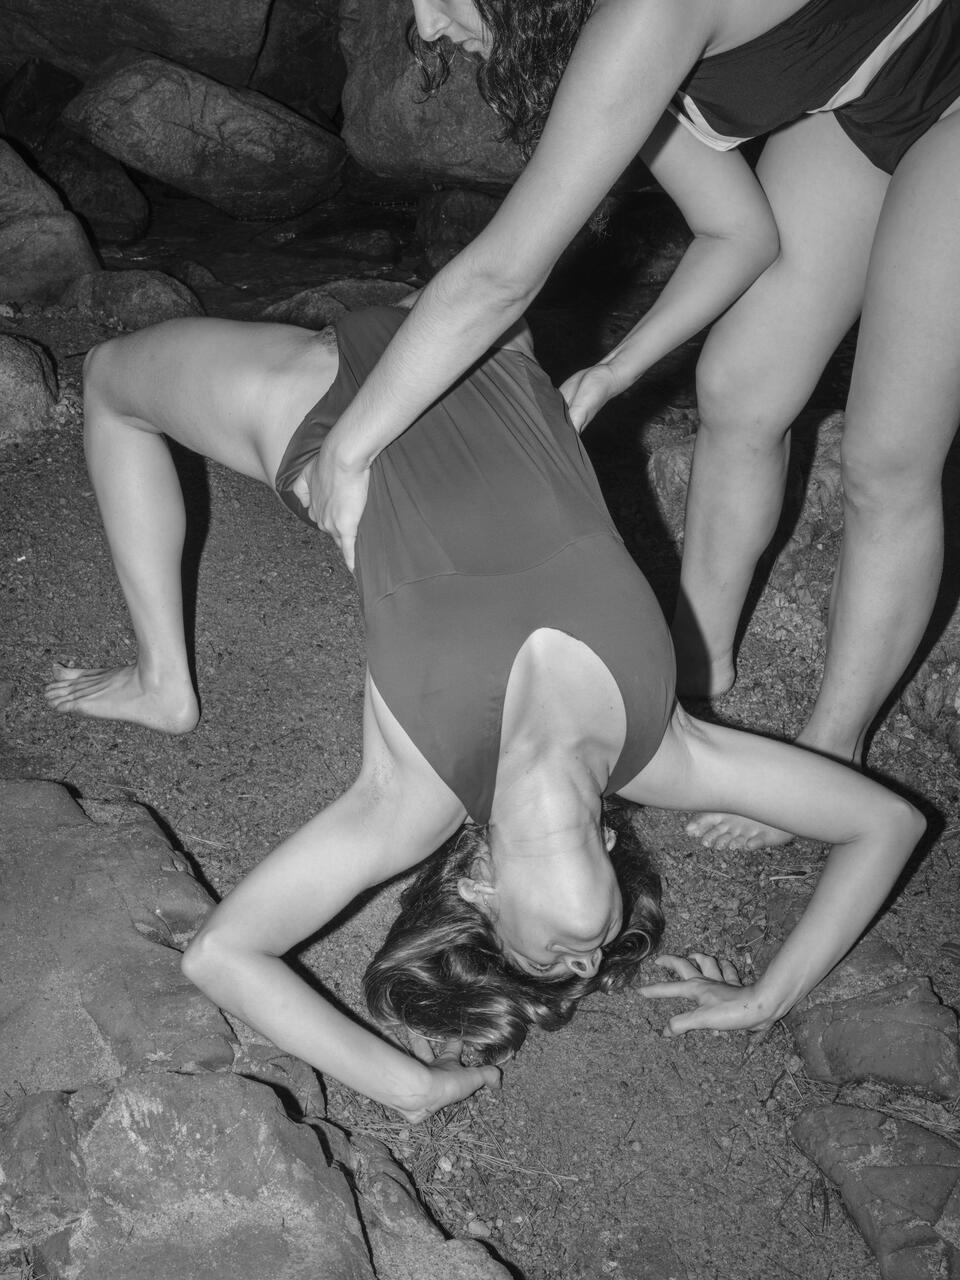 Black and white photograph of two people on the rocks of a beach, one person holding the other while she tries to make a complicated body posture